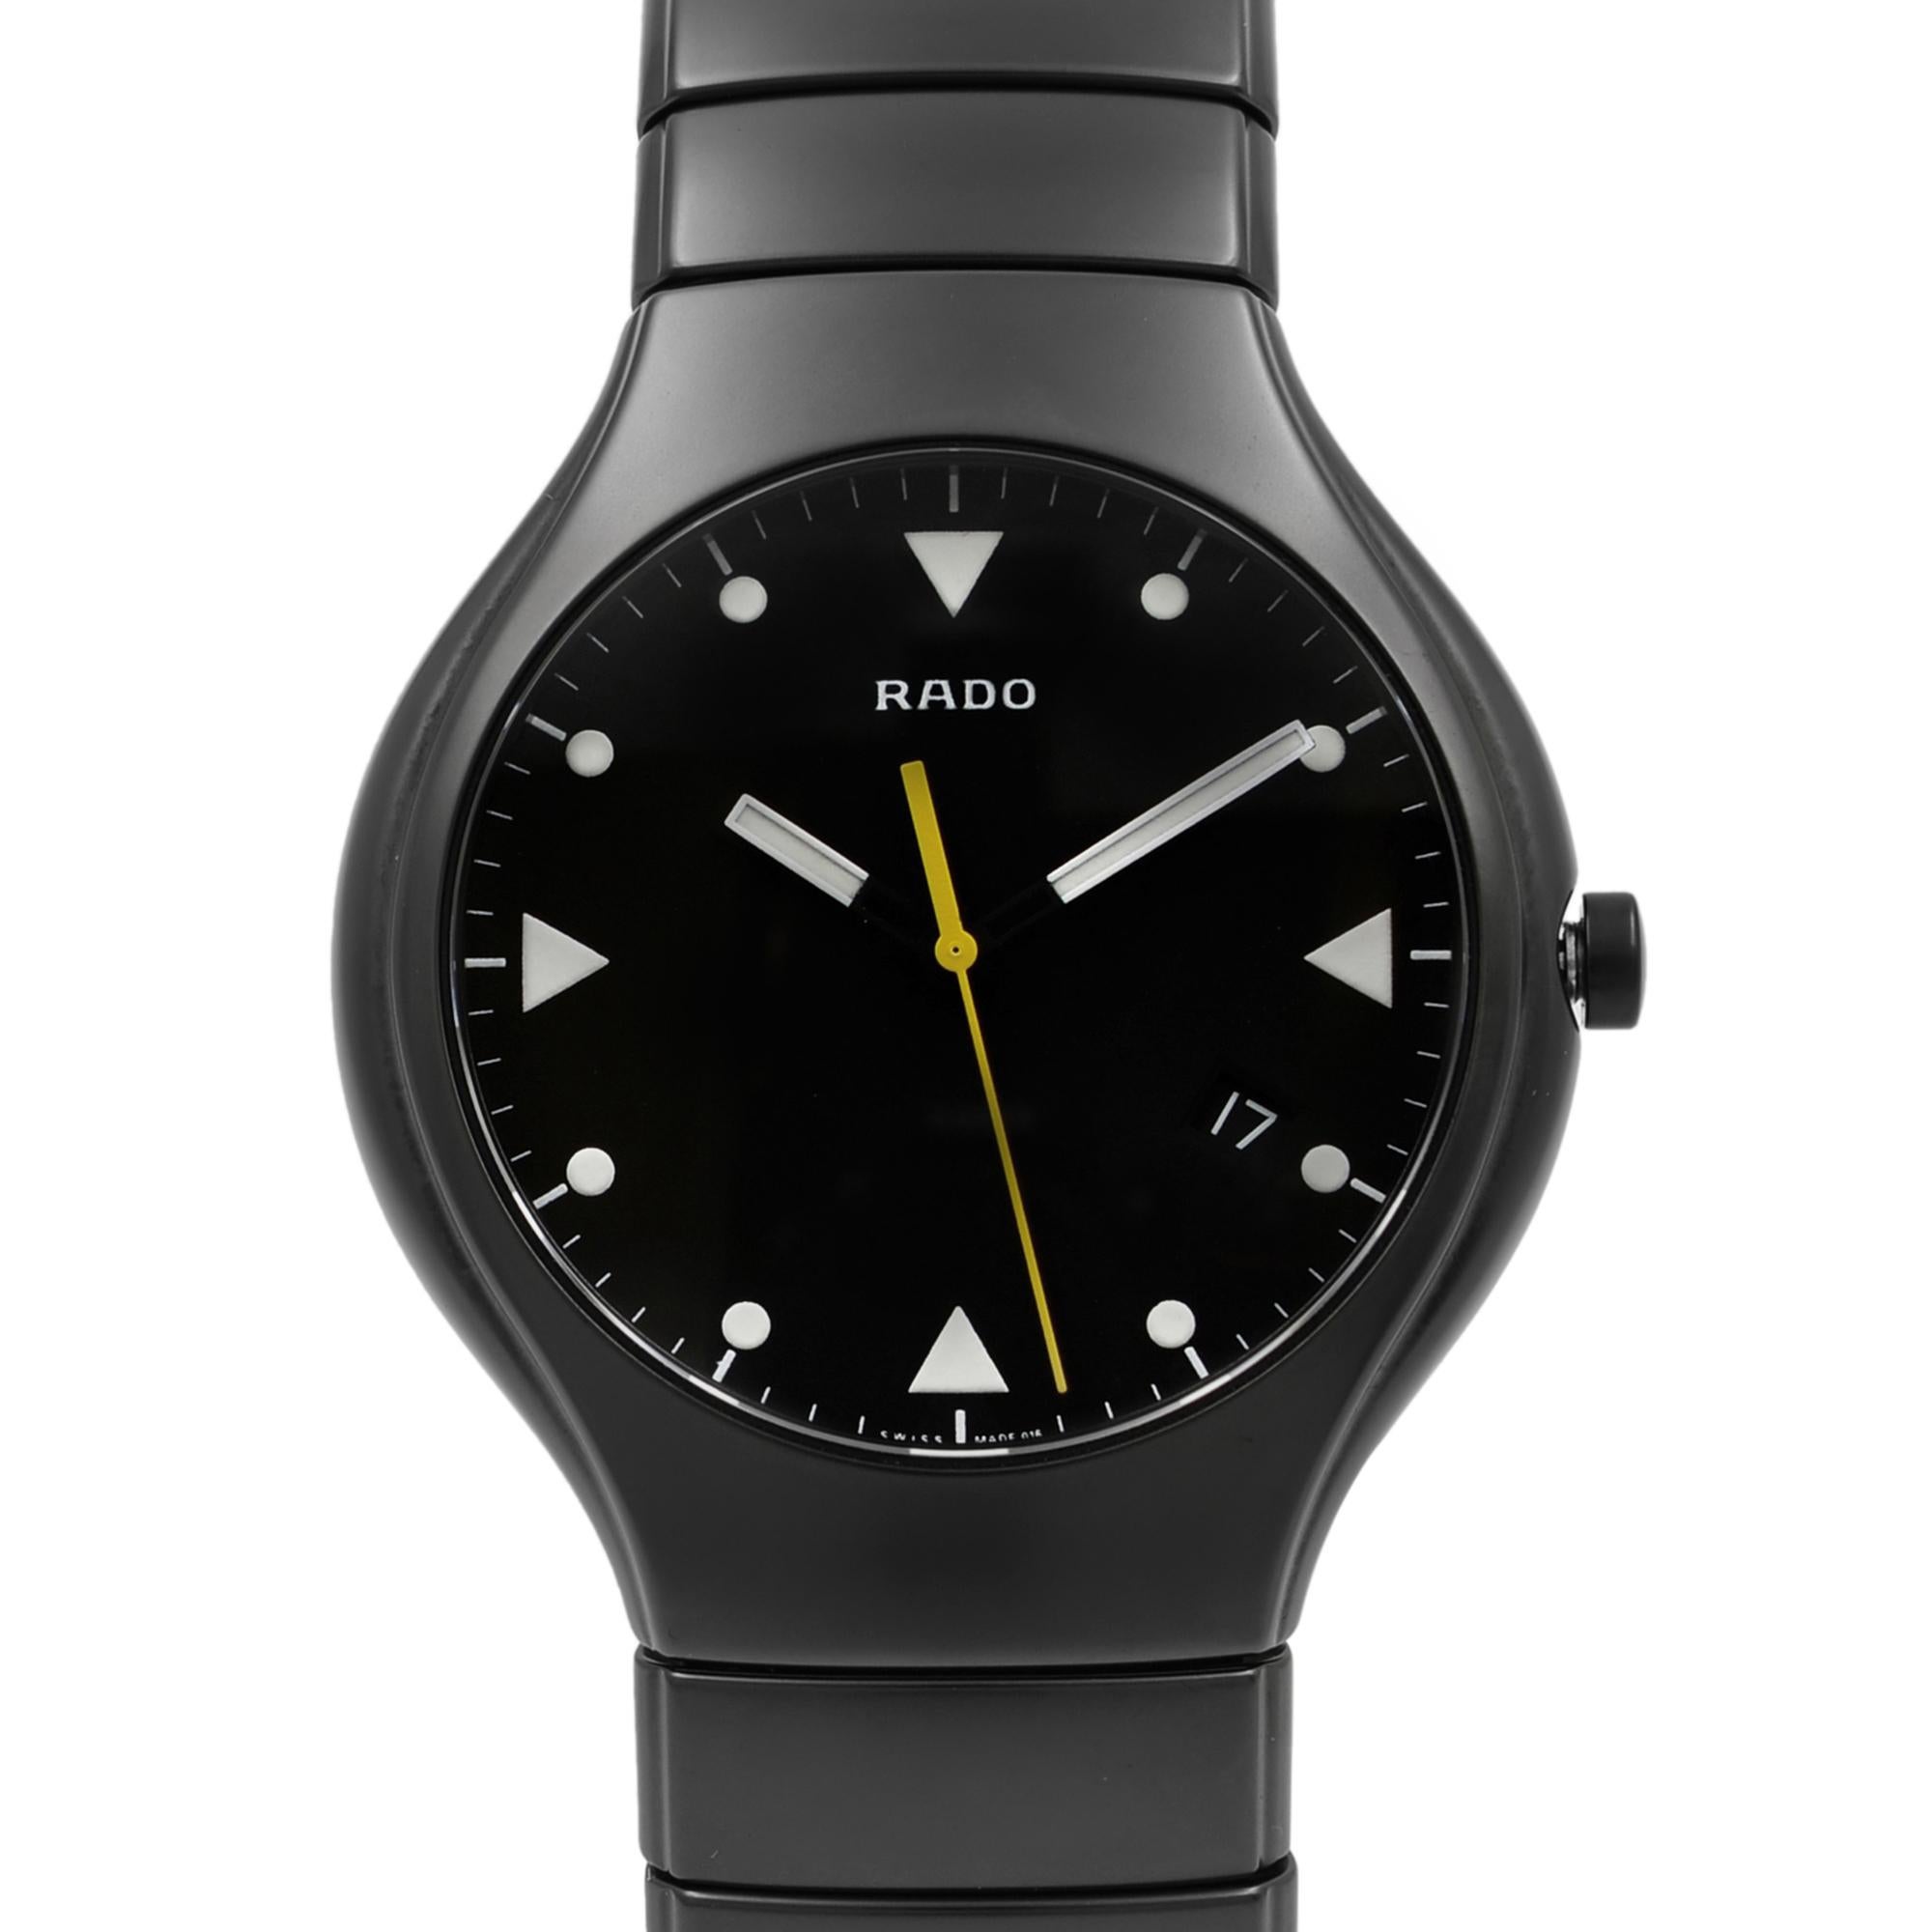 This brand new Rado True  is a beautiful men's timepiece that is powered by a quartz movement which is cased in a ceramic case. It has a round shape face, date dial and has hand dots style markers. It is completed with a ceramic band that opens and